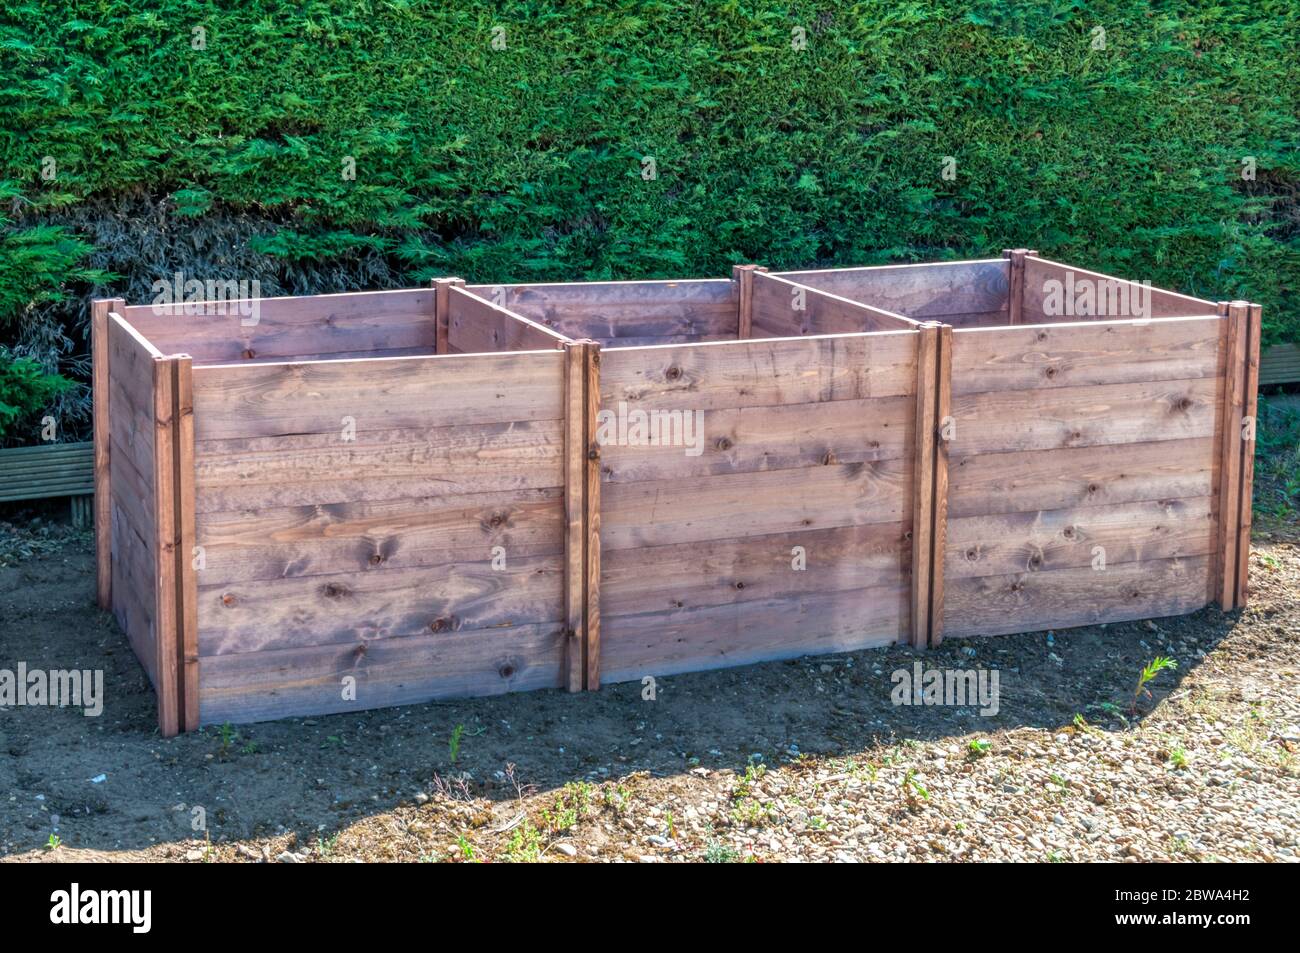 A traditional slot down wooden triple compost bin. Stock Photo